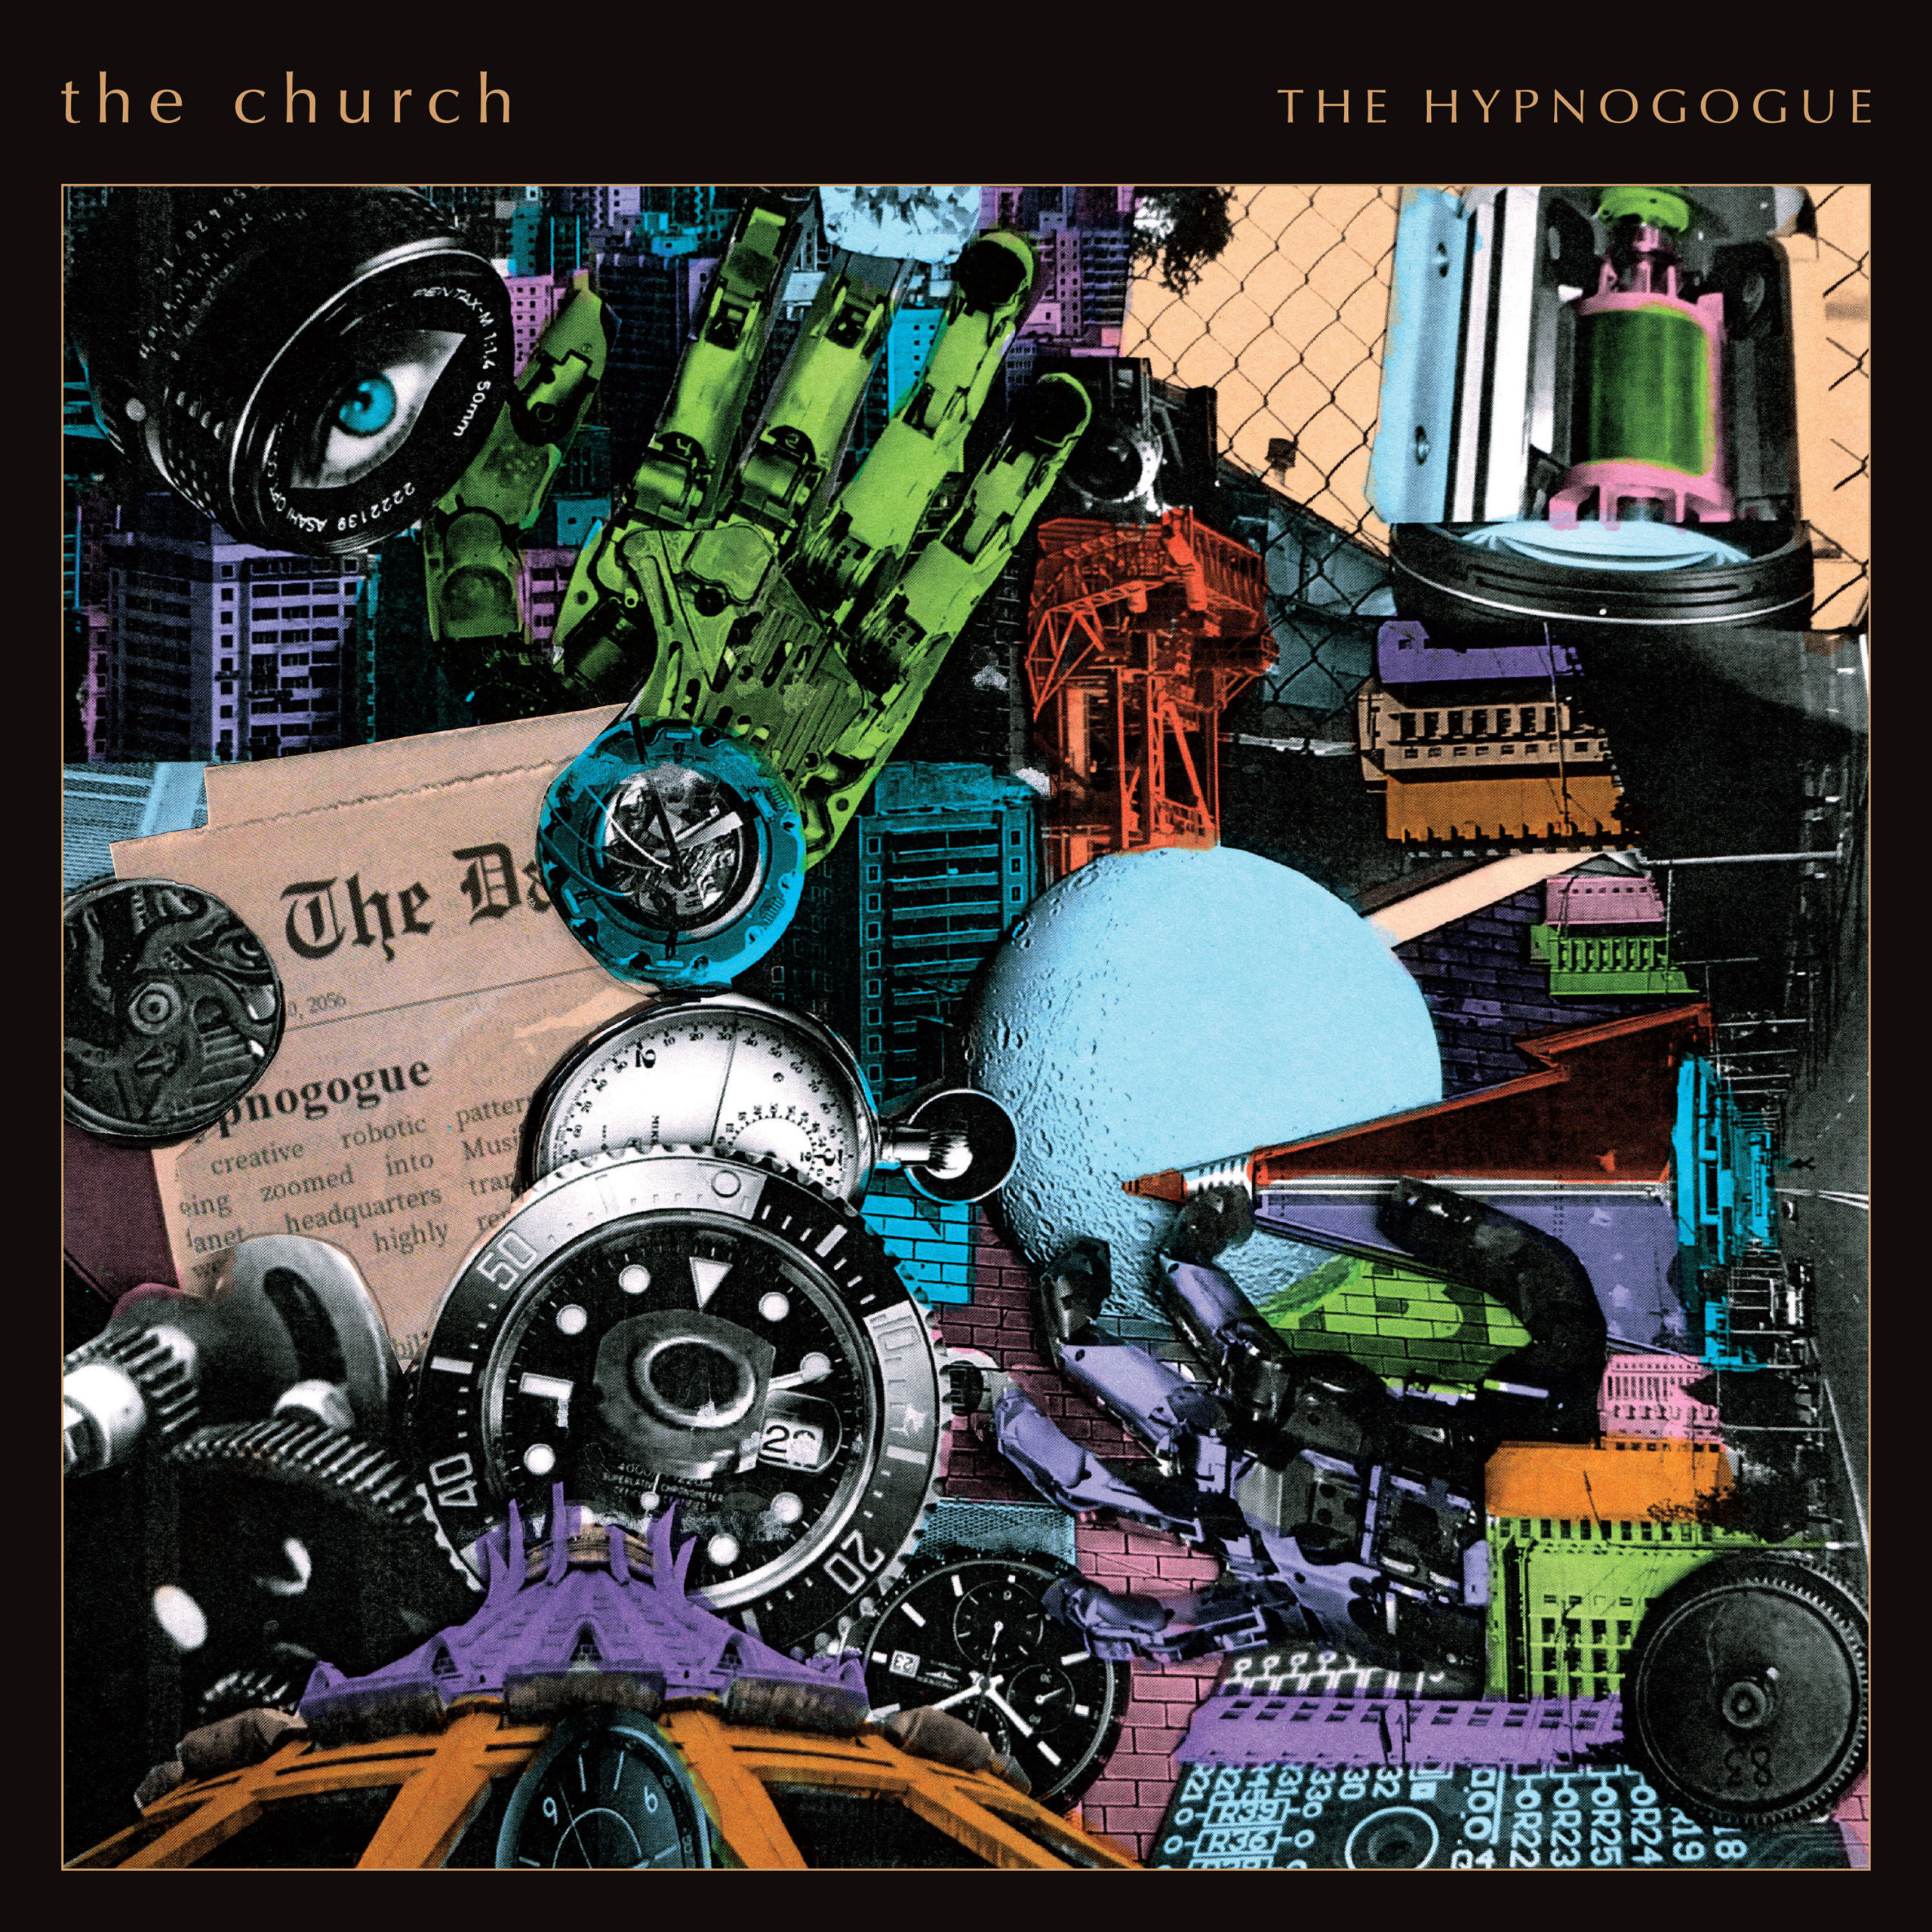 The Hypnogogue by The Church album cover